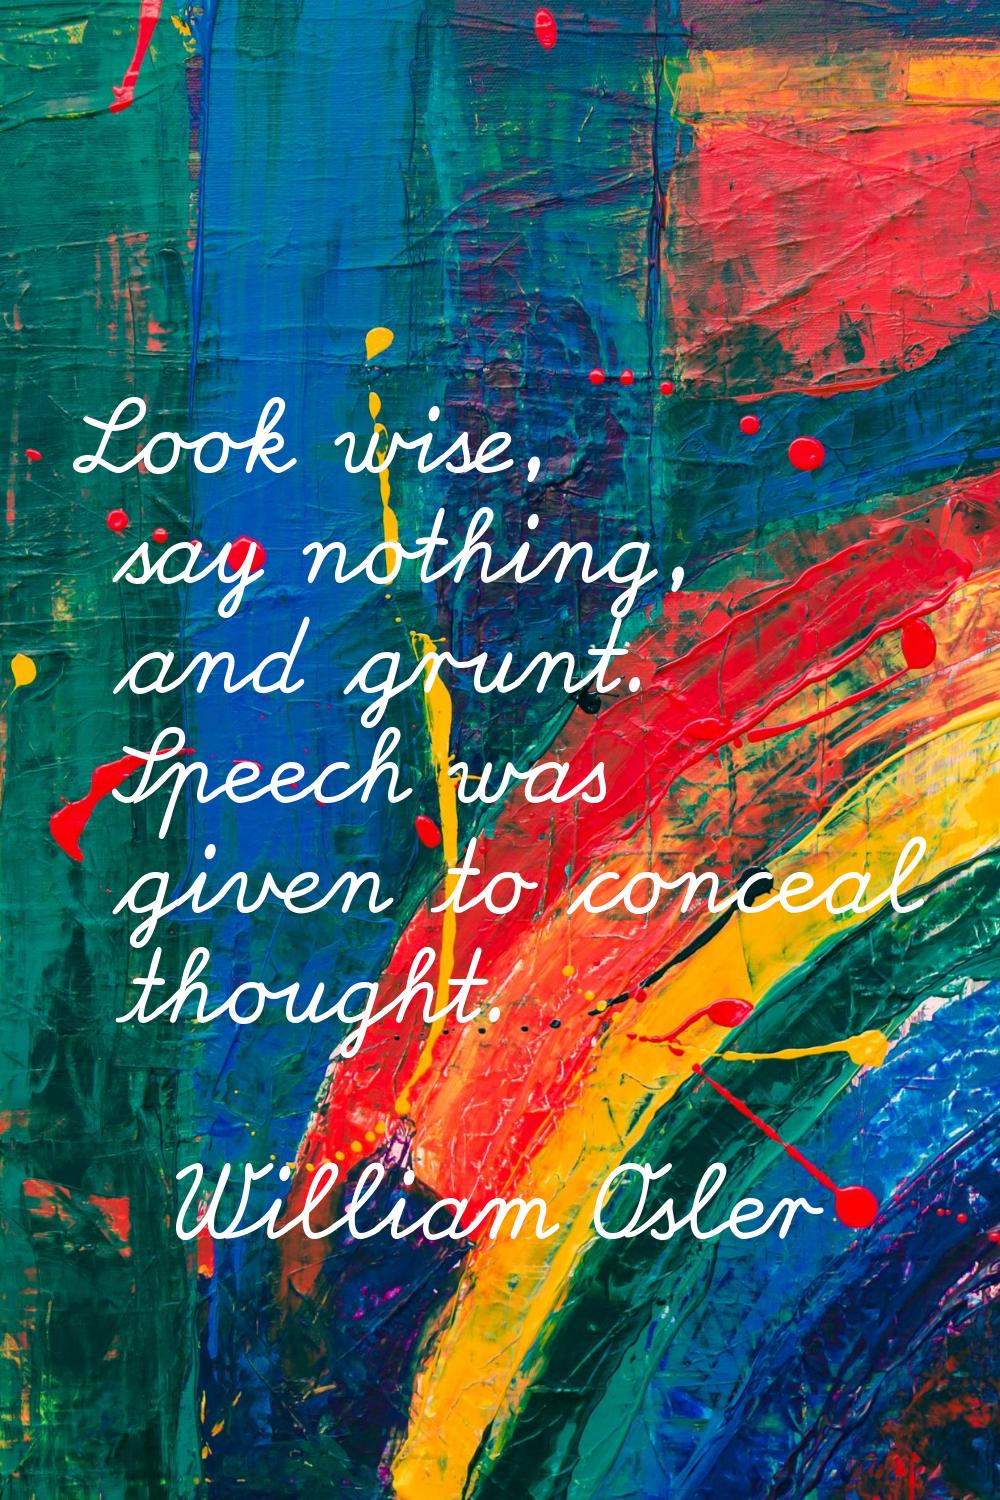 Look wise, say nothing, and grunt. Speech was given to conceal thought.